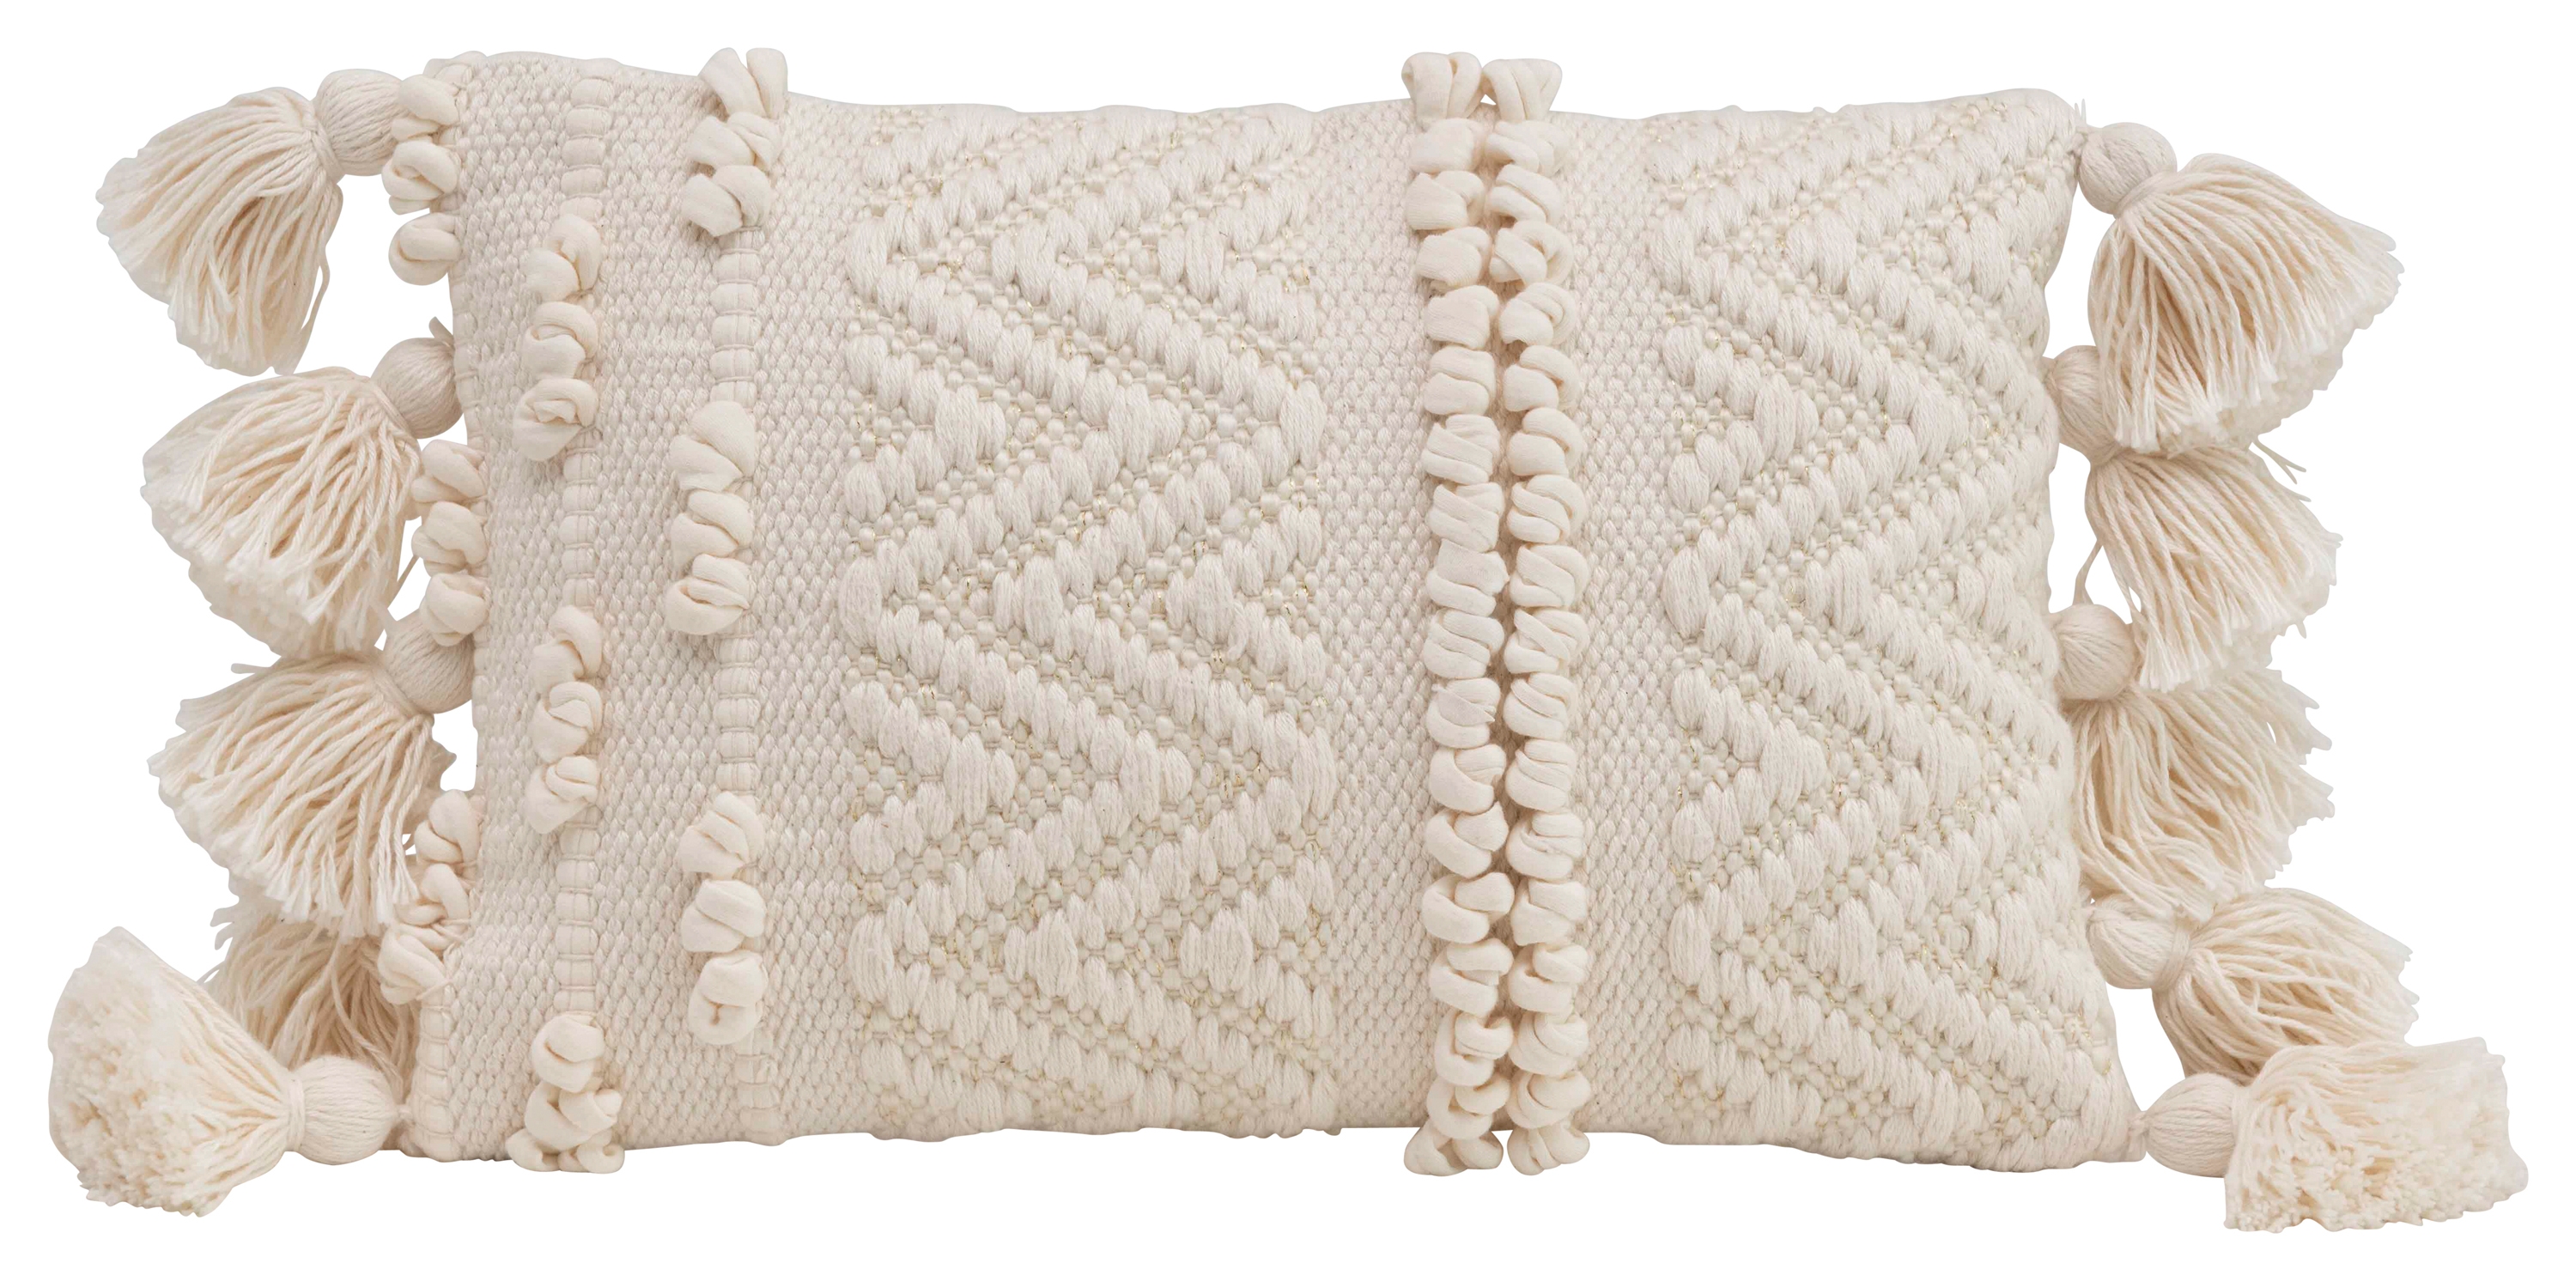  Woven Cotton Textured Lumbar Pillow with Pom Poms and Tassels, Cream - Image 0